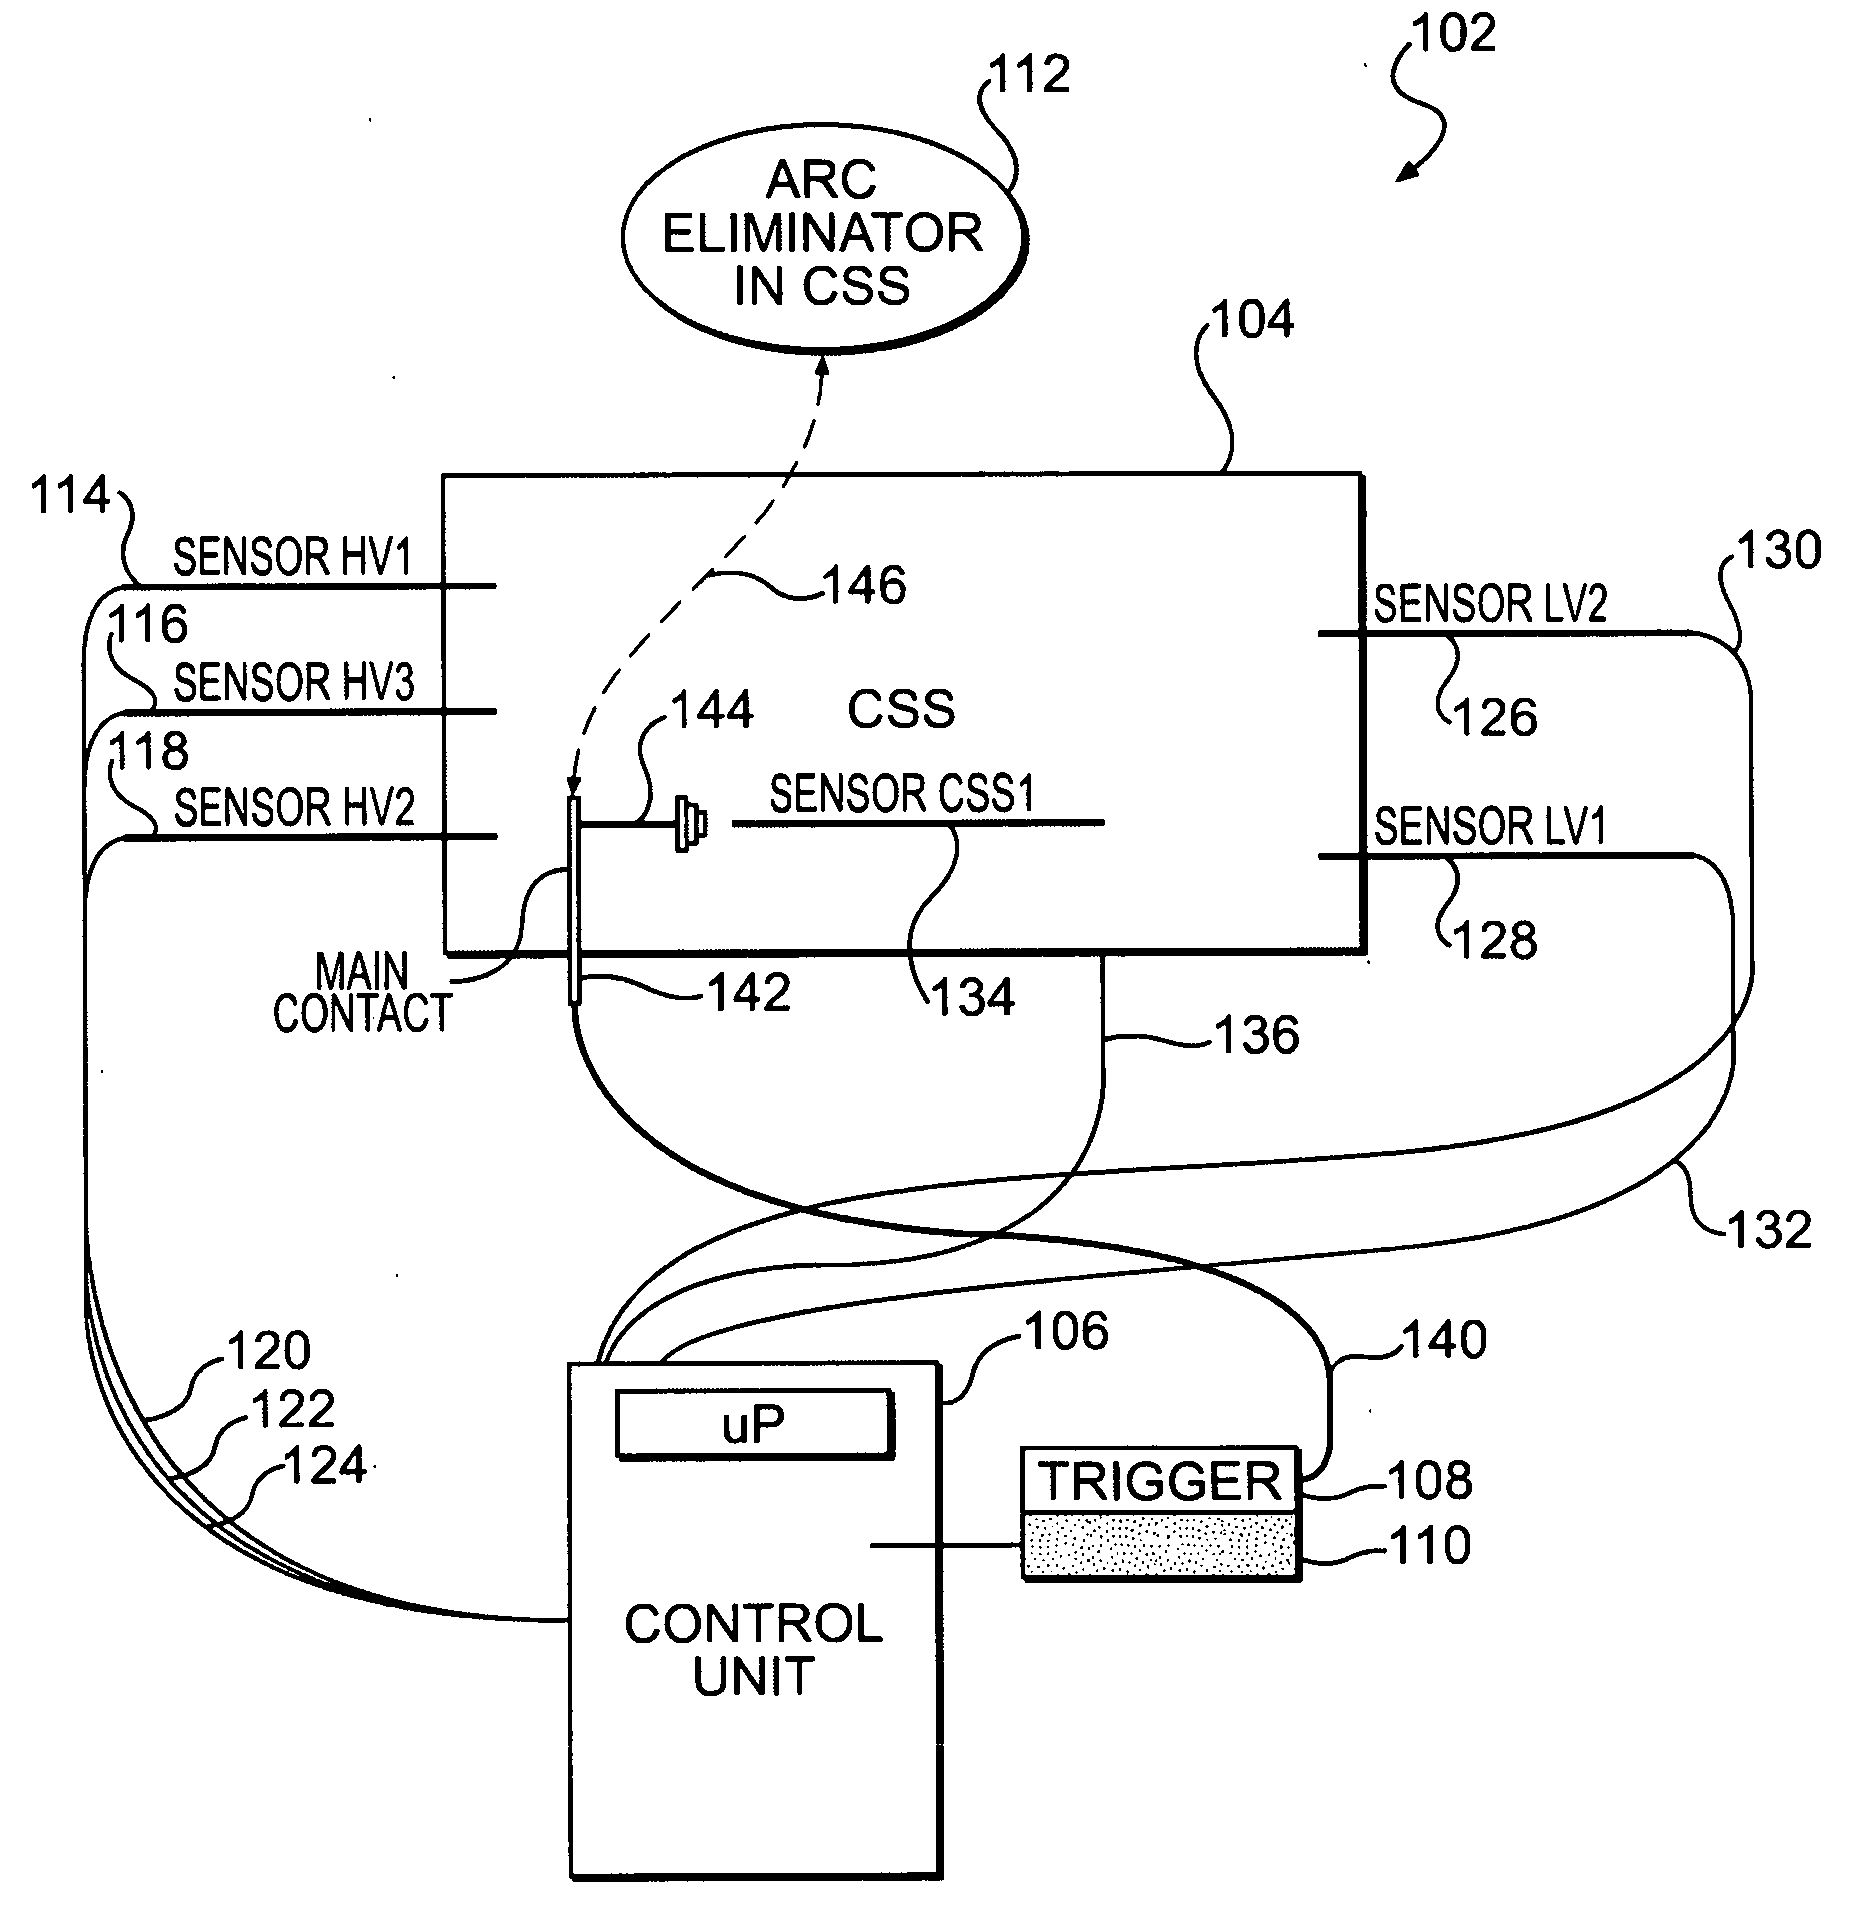 Method for operating a sealed for life compact secondary substation